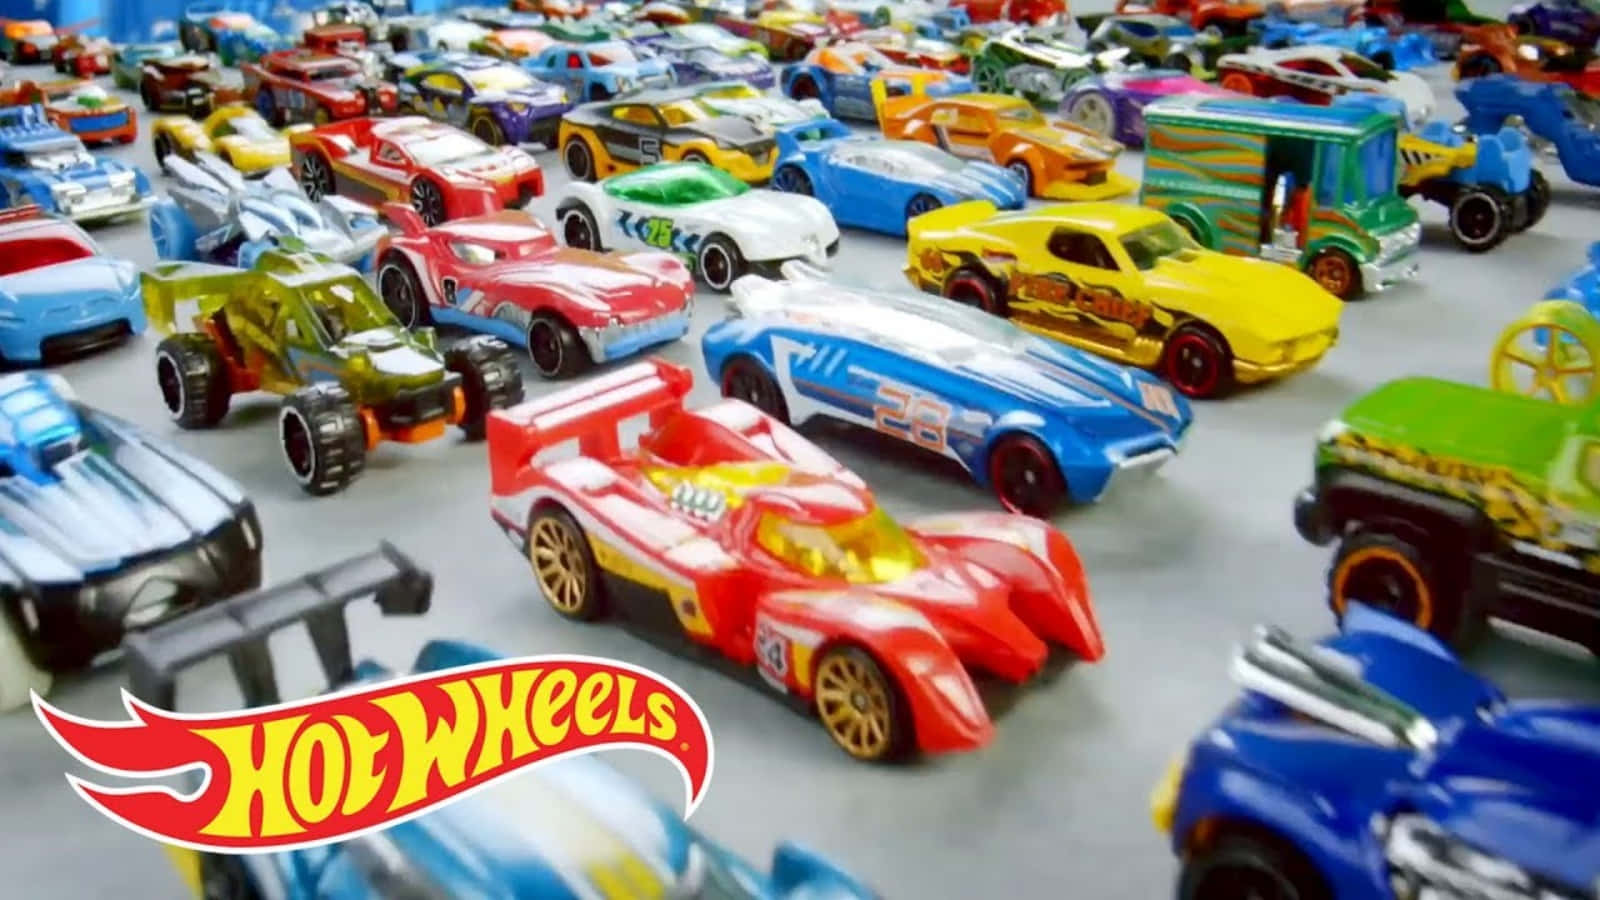 Hot Wheels Toy Cars In A Room